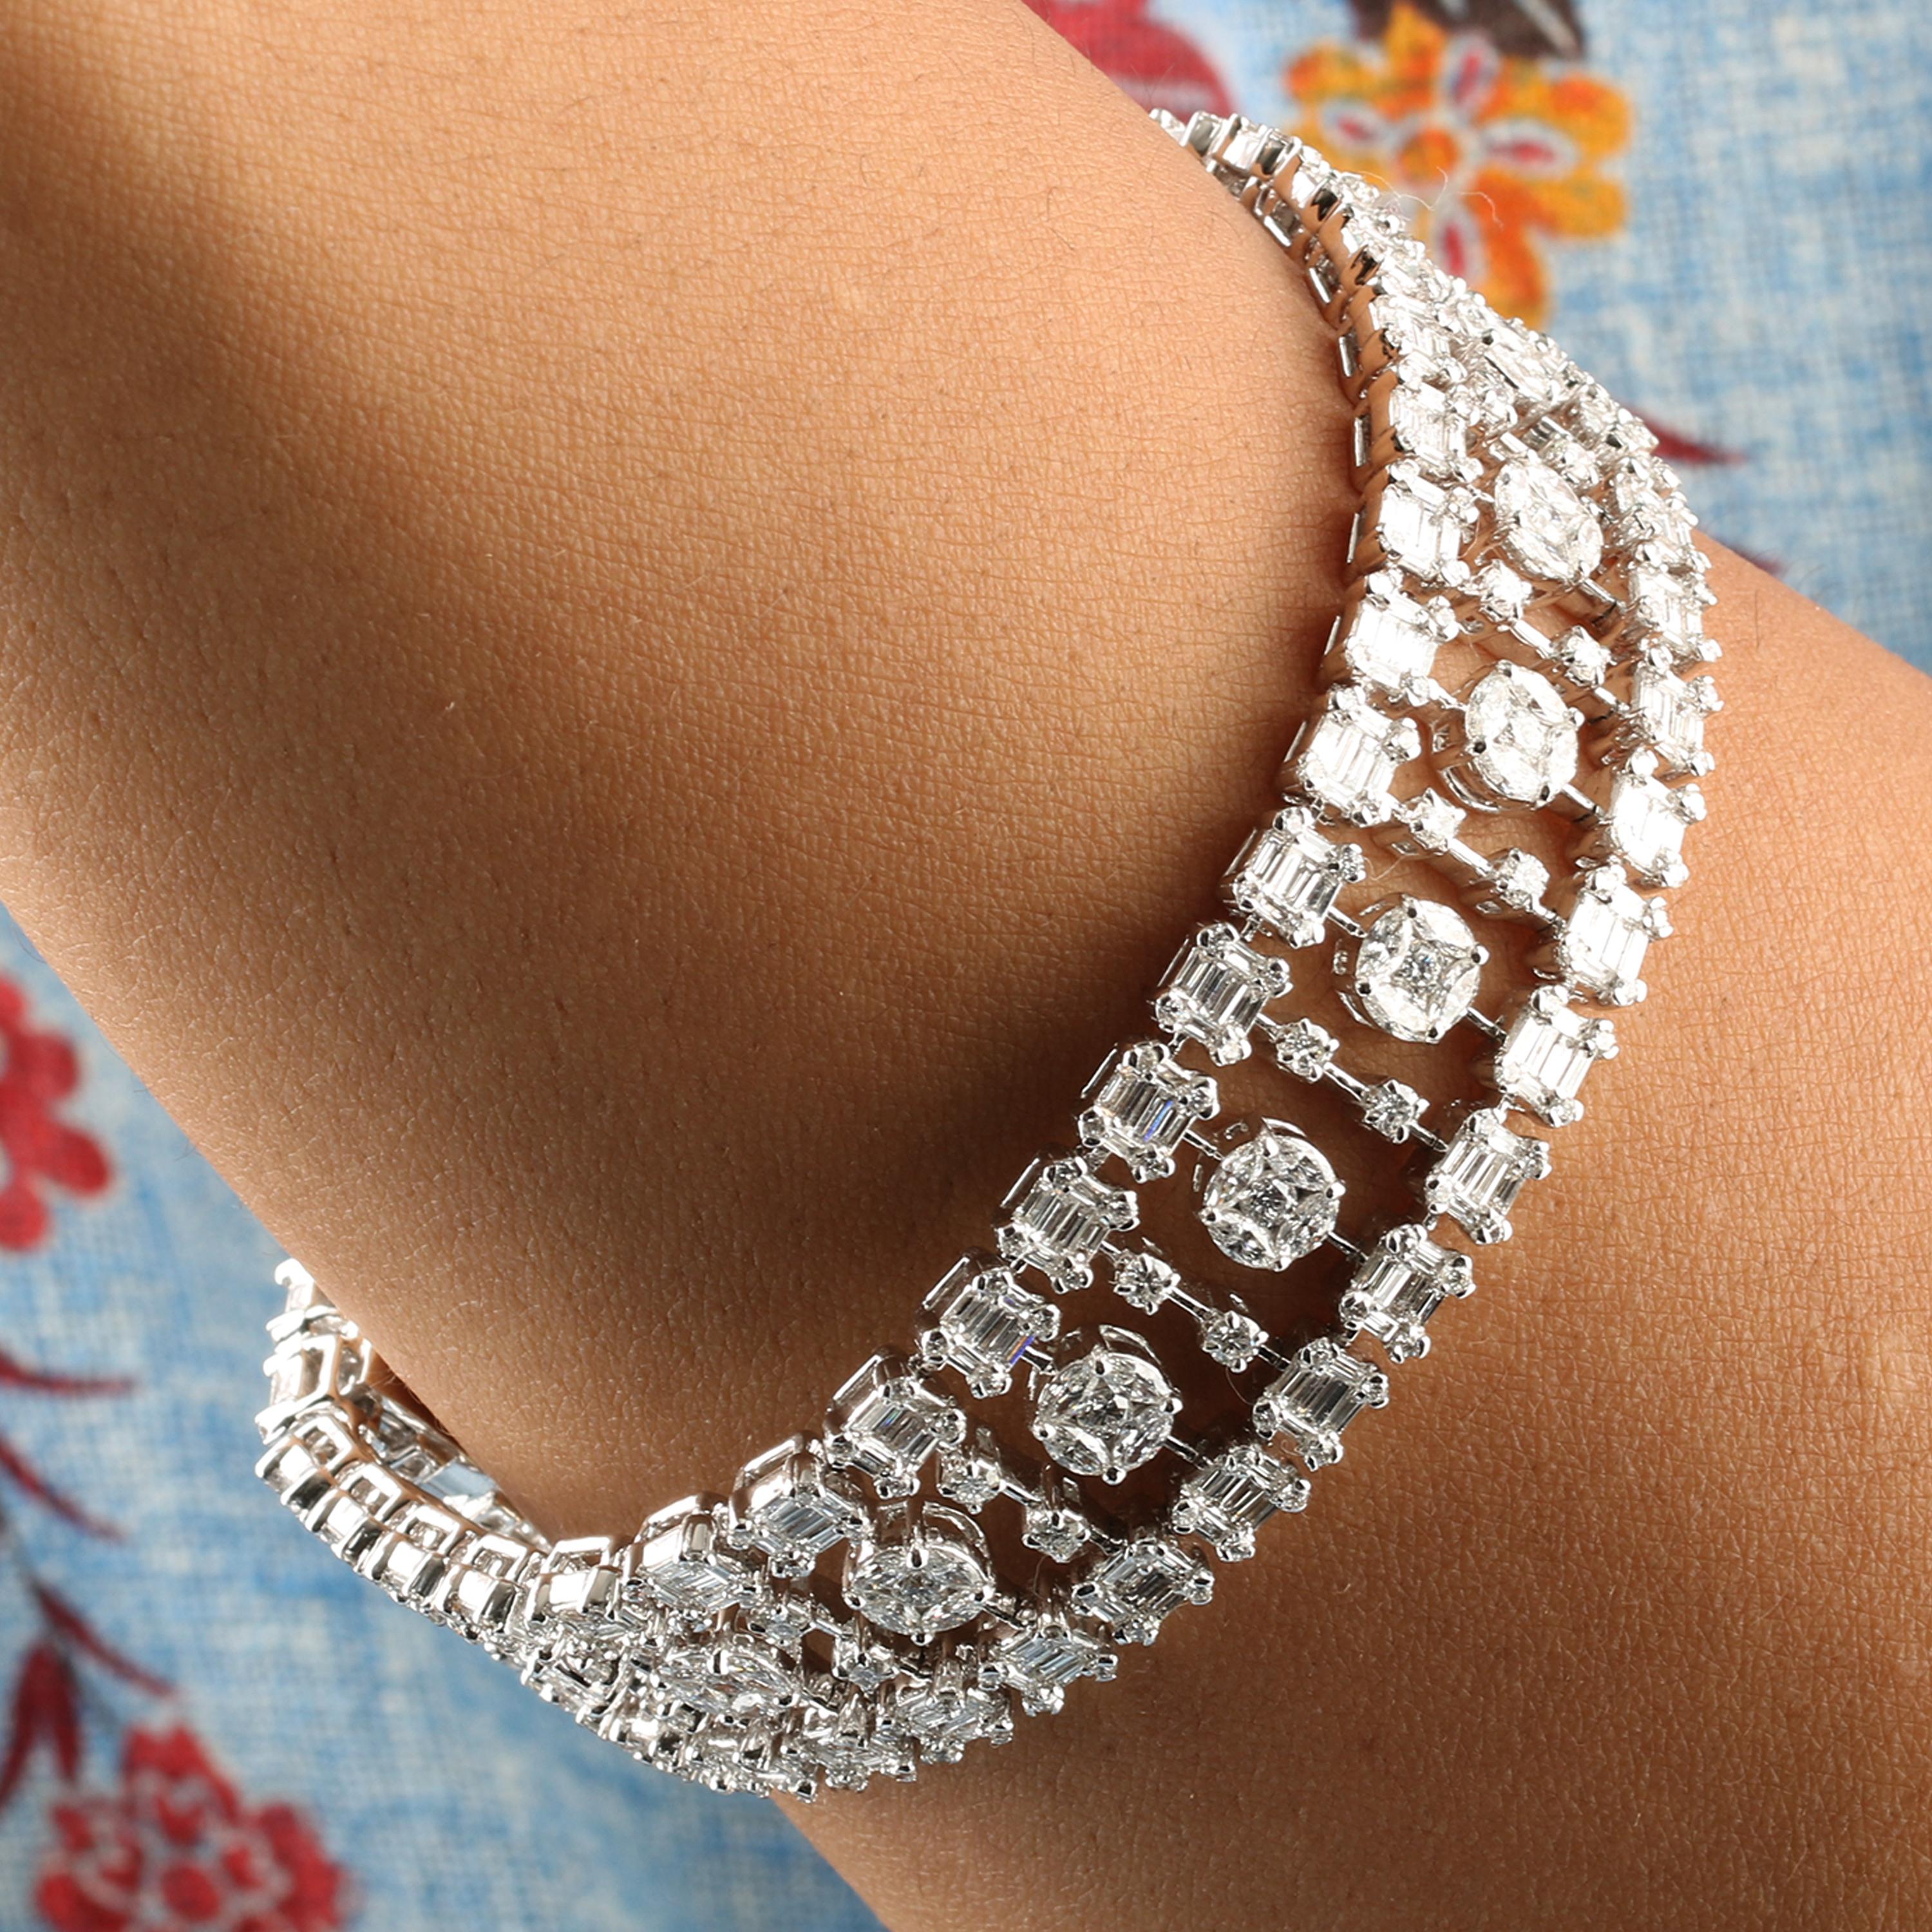 Gross Weight: 48.22 Grams
Diamond Weight: 10.49 cts
Size: 7 Inch (Length of Tennis Bracelet)
IGI Certification can be done on request.

Video of the product can be shared on request.

This bracelet crafted using 18 Karat white gold and studded with